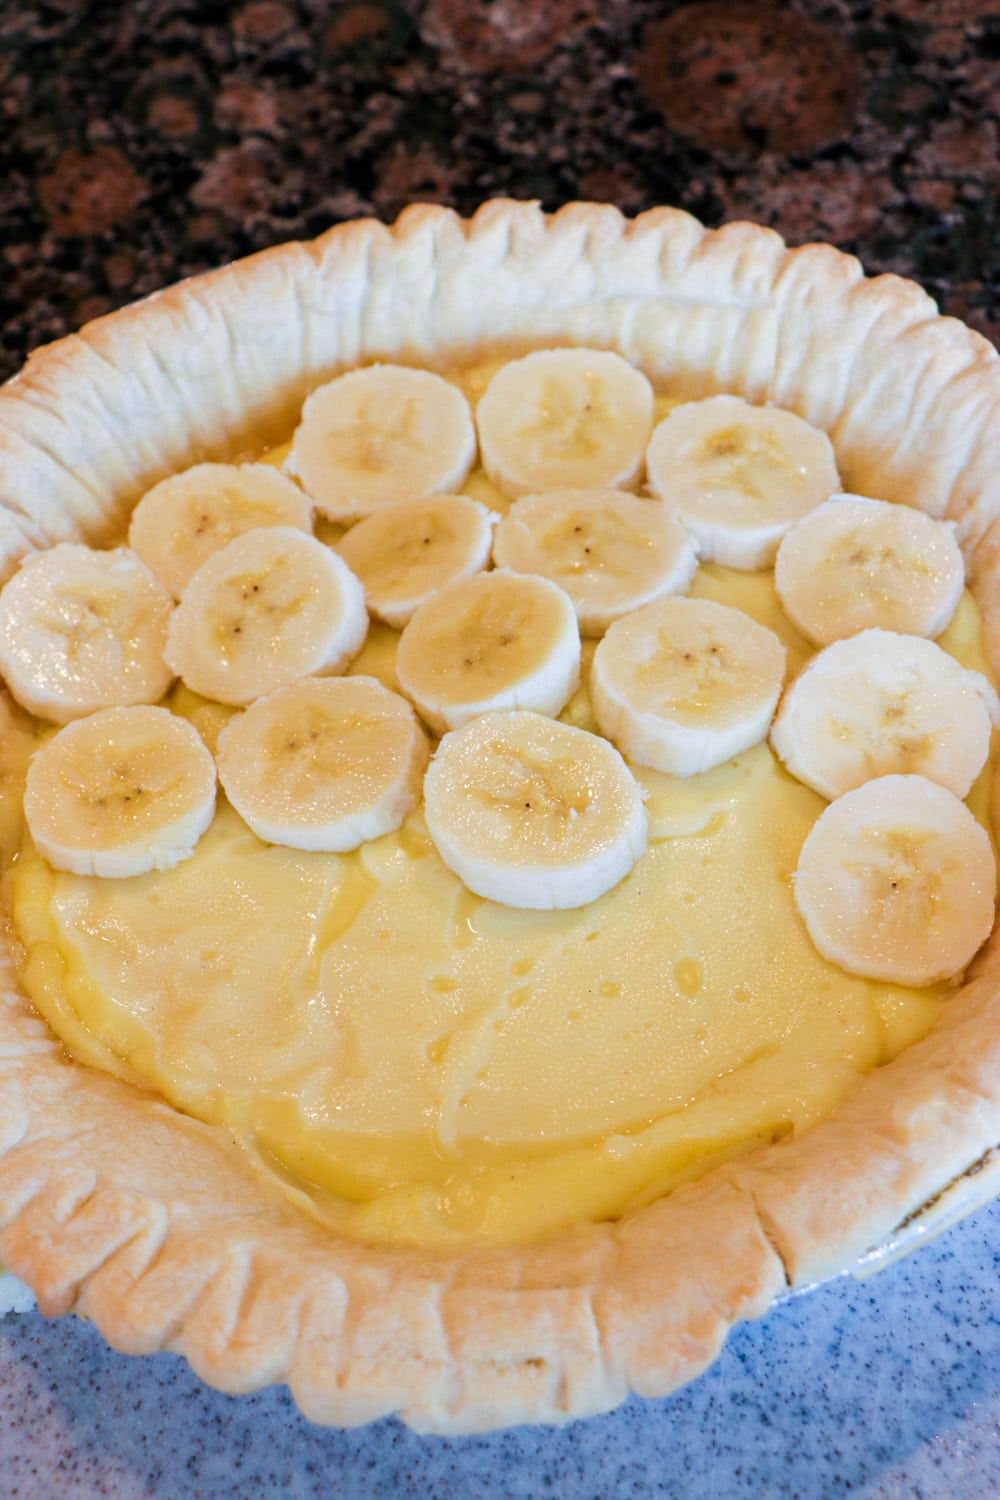 Banana slices placed on top of pudding layer.